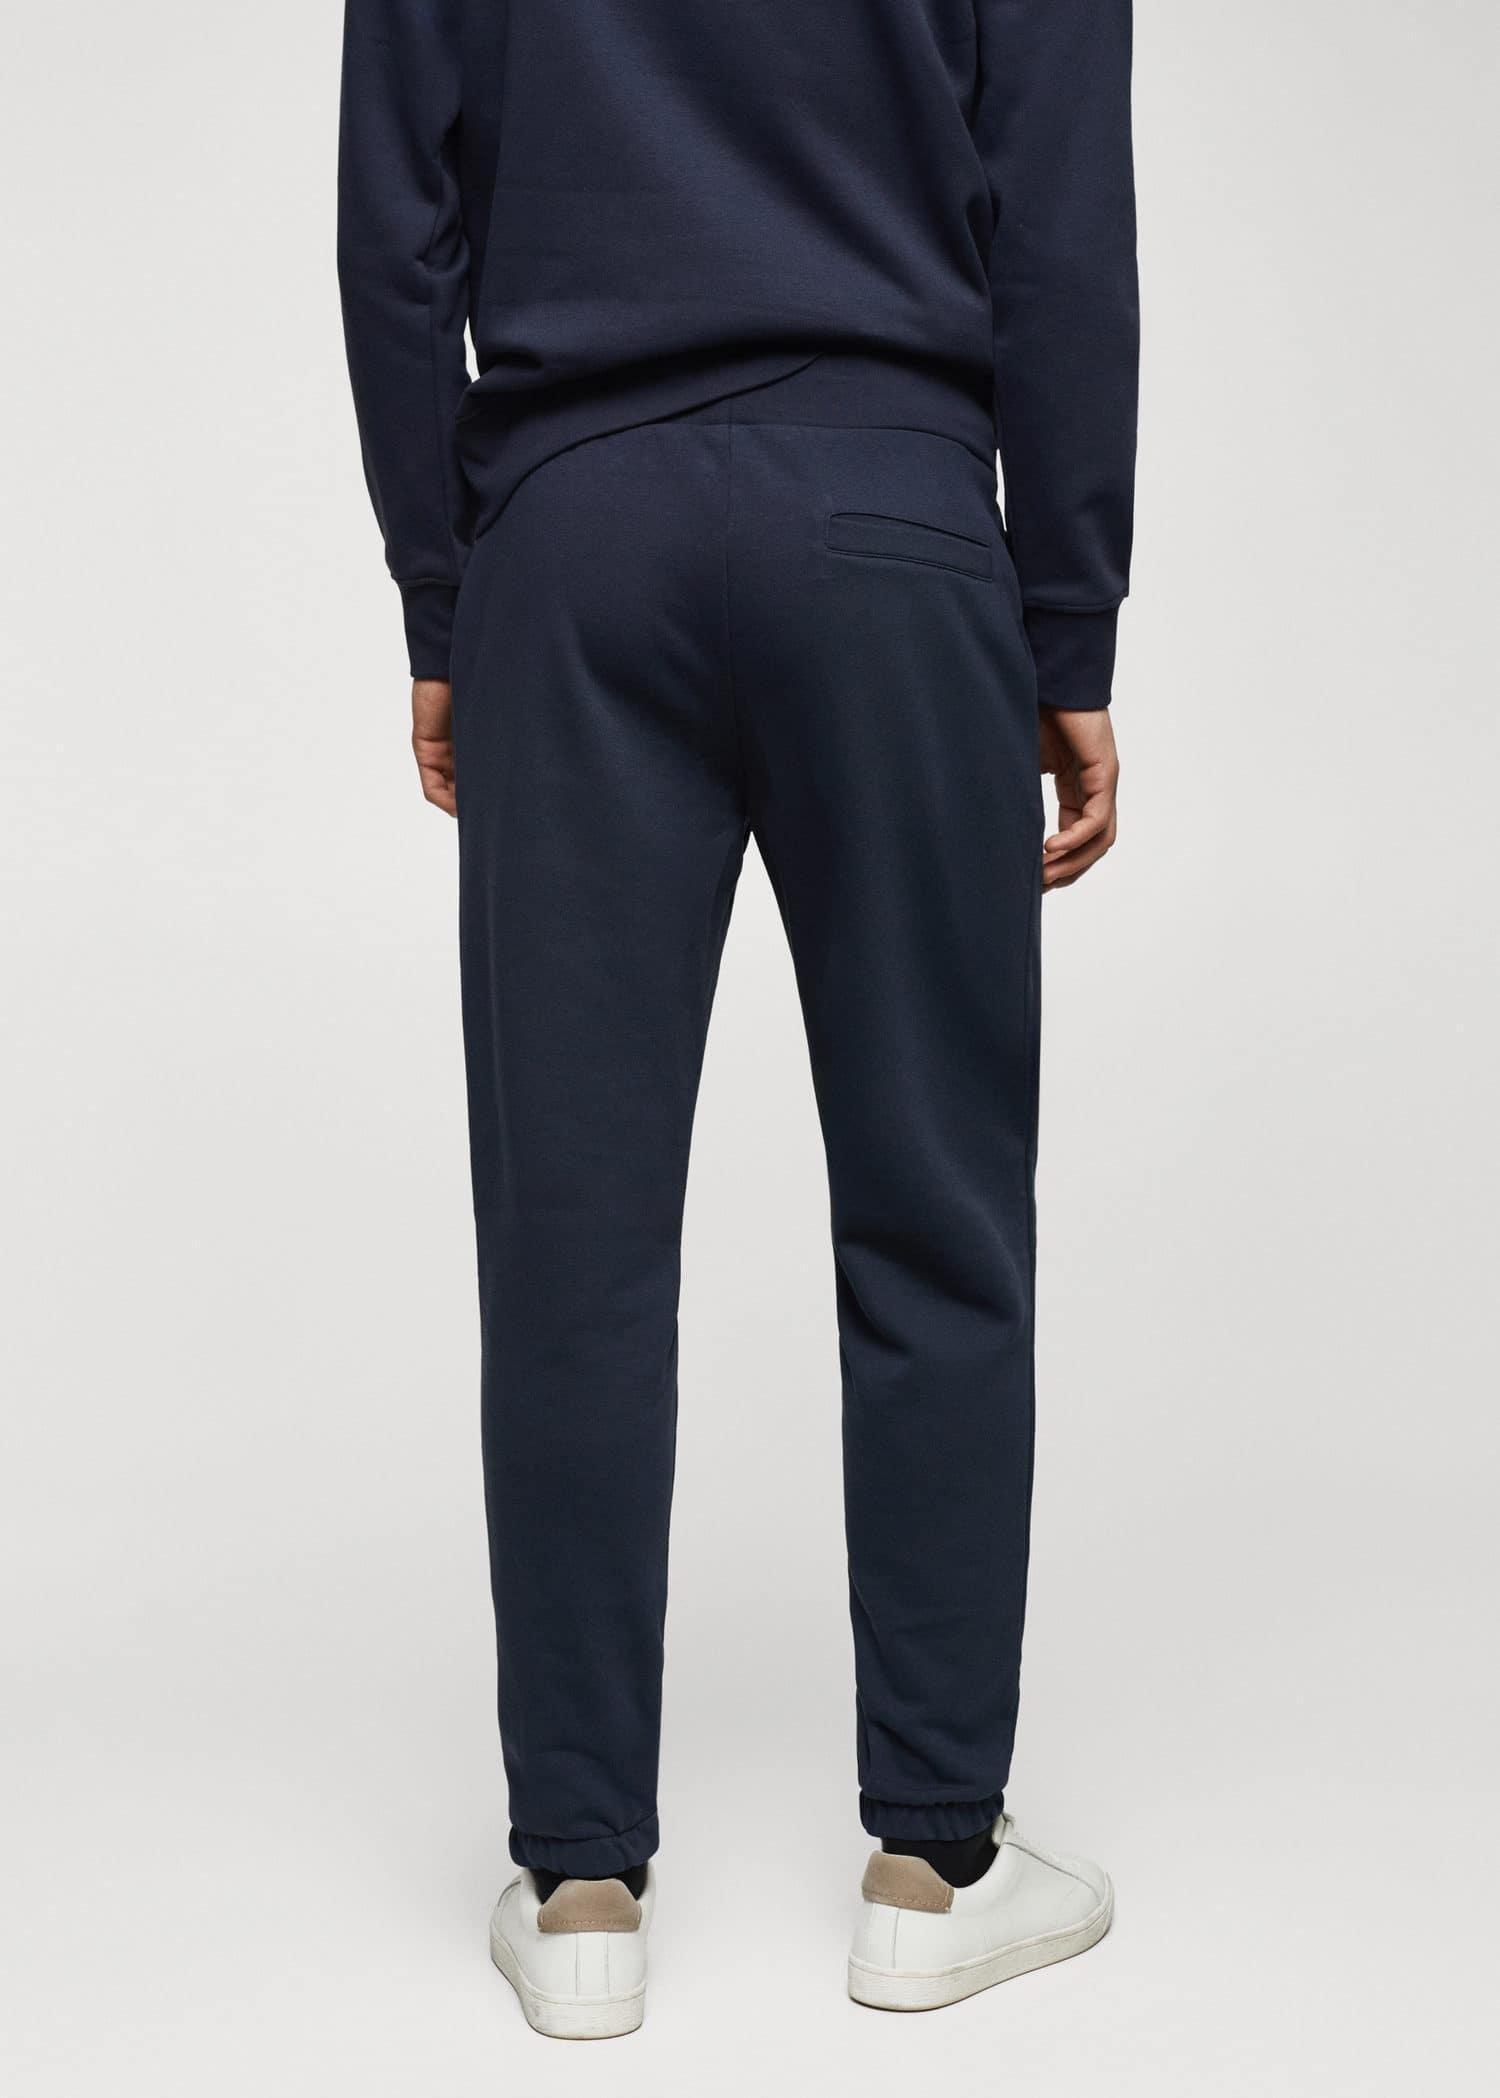 Mango - Navy Cotton Jogger-Style Trousers